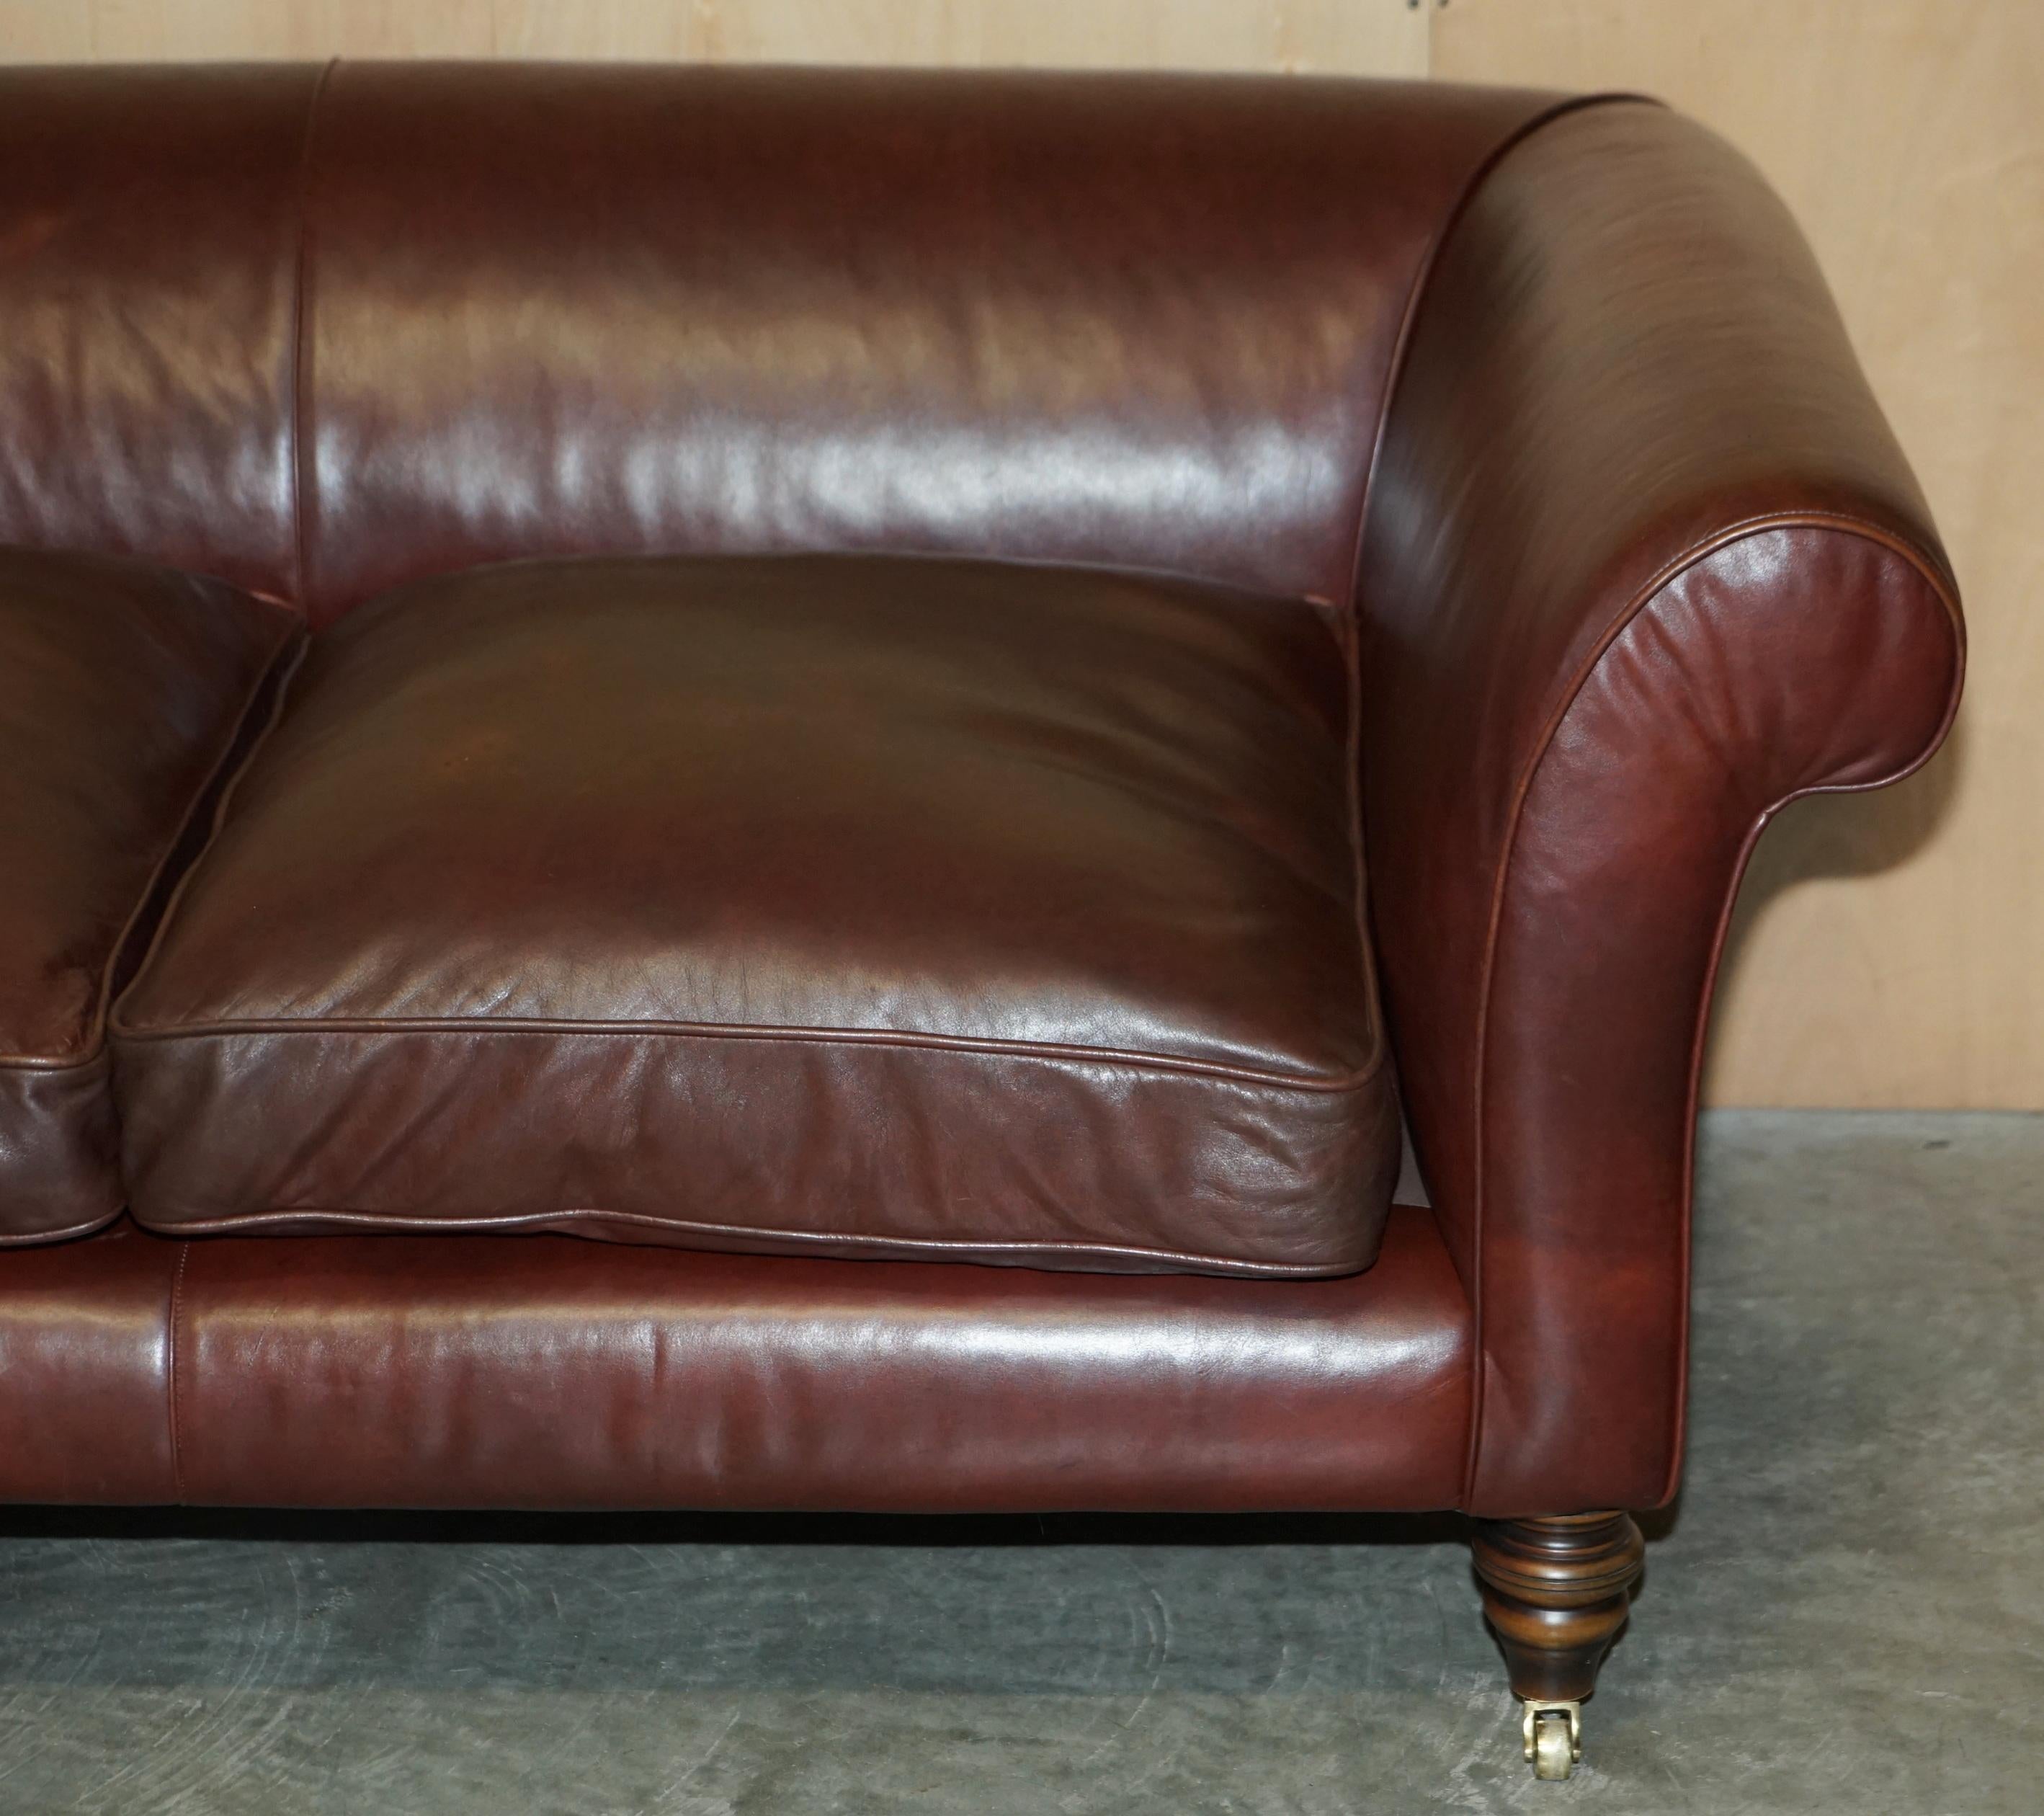 Art Deco ViNTAGE HAND DYED BROWN LEATHER ART DECO THREE SEAT SOFA FEATHER FILLED SEAT For Sale